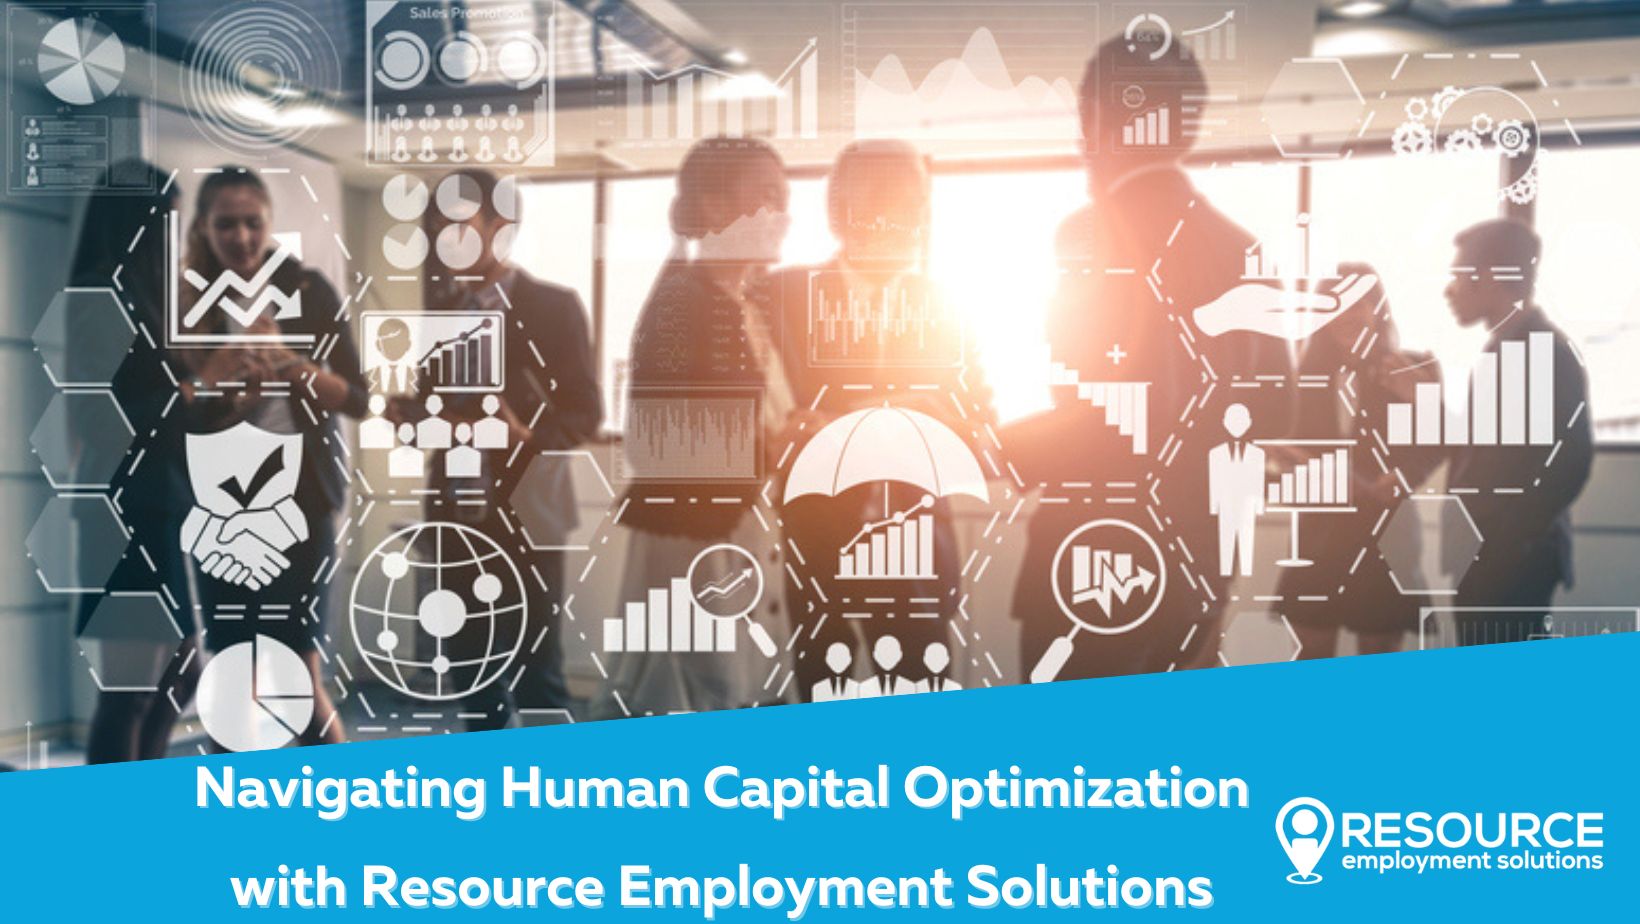 Navigating Human Capital Optimization with Resource Employment Solutions